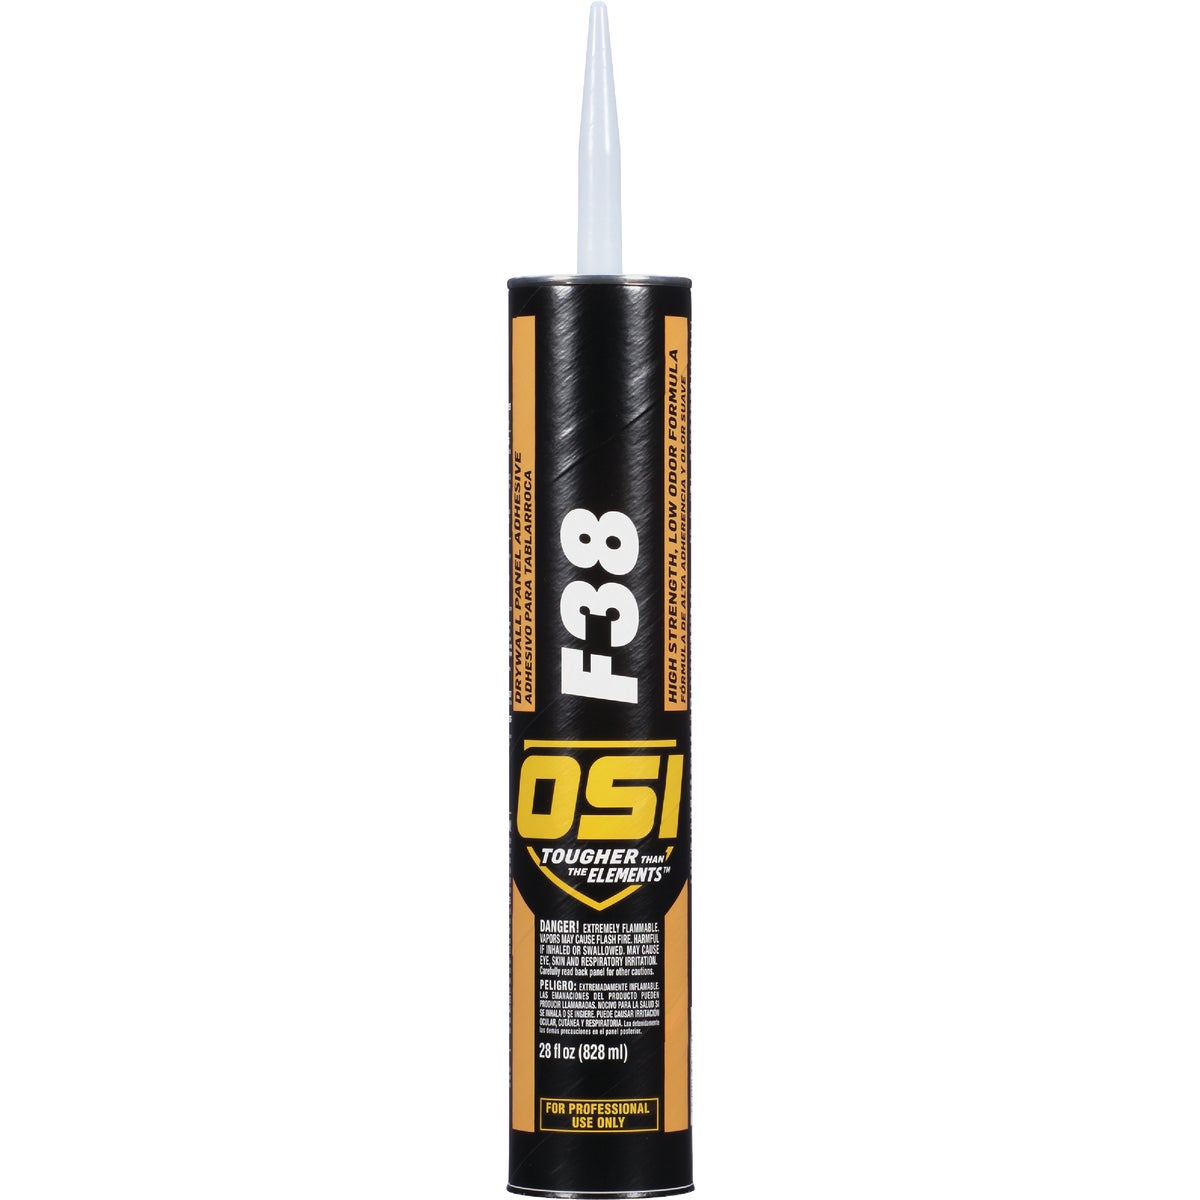 Item 276533, Professional grade, latex-based construction adhesive designed for drywall 